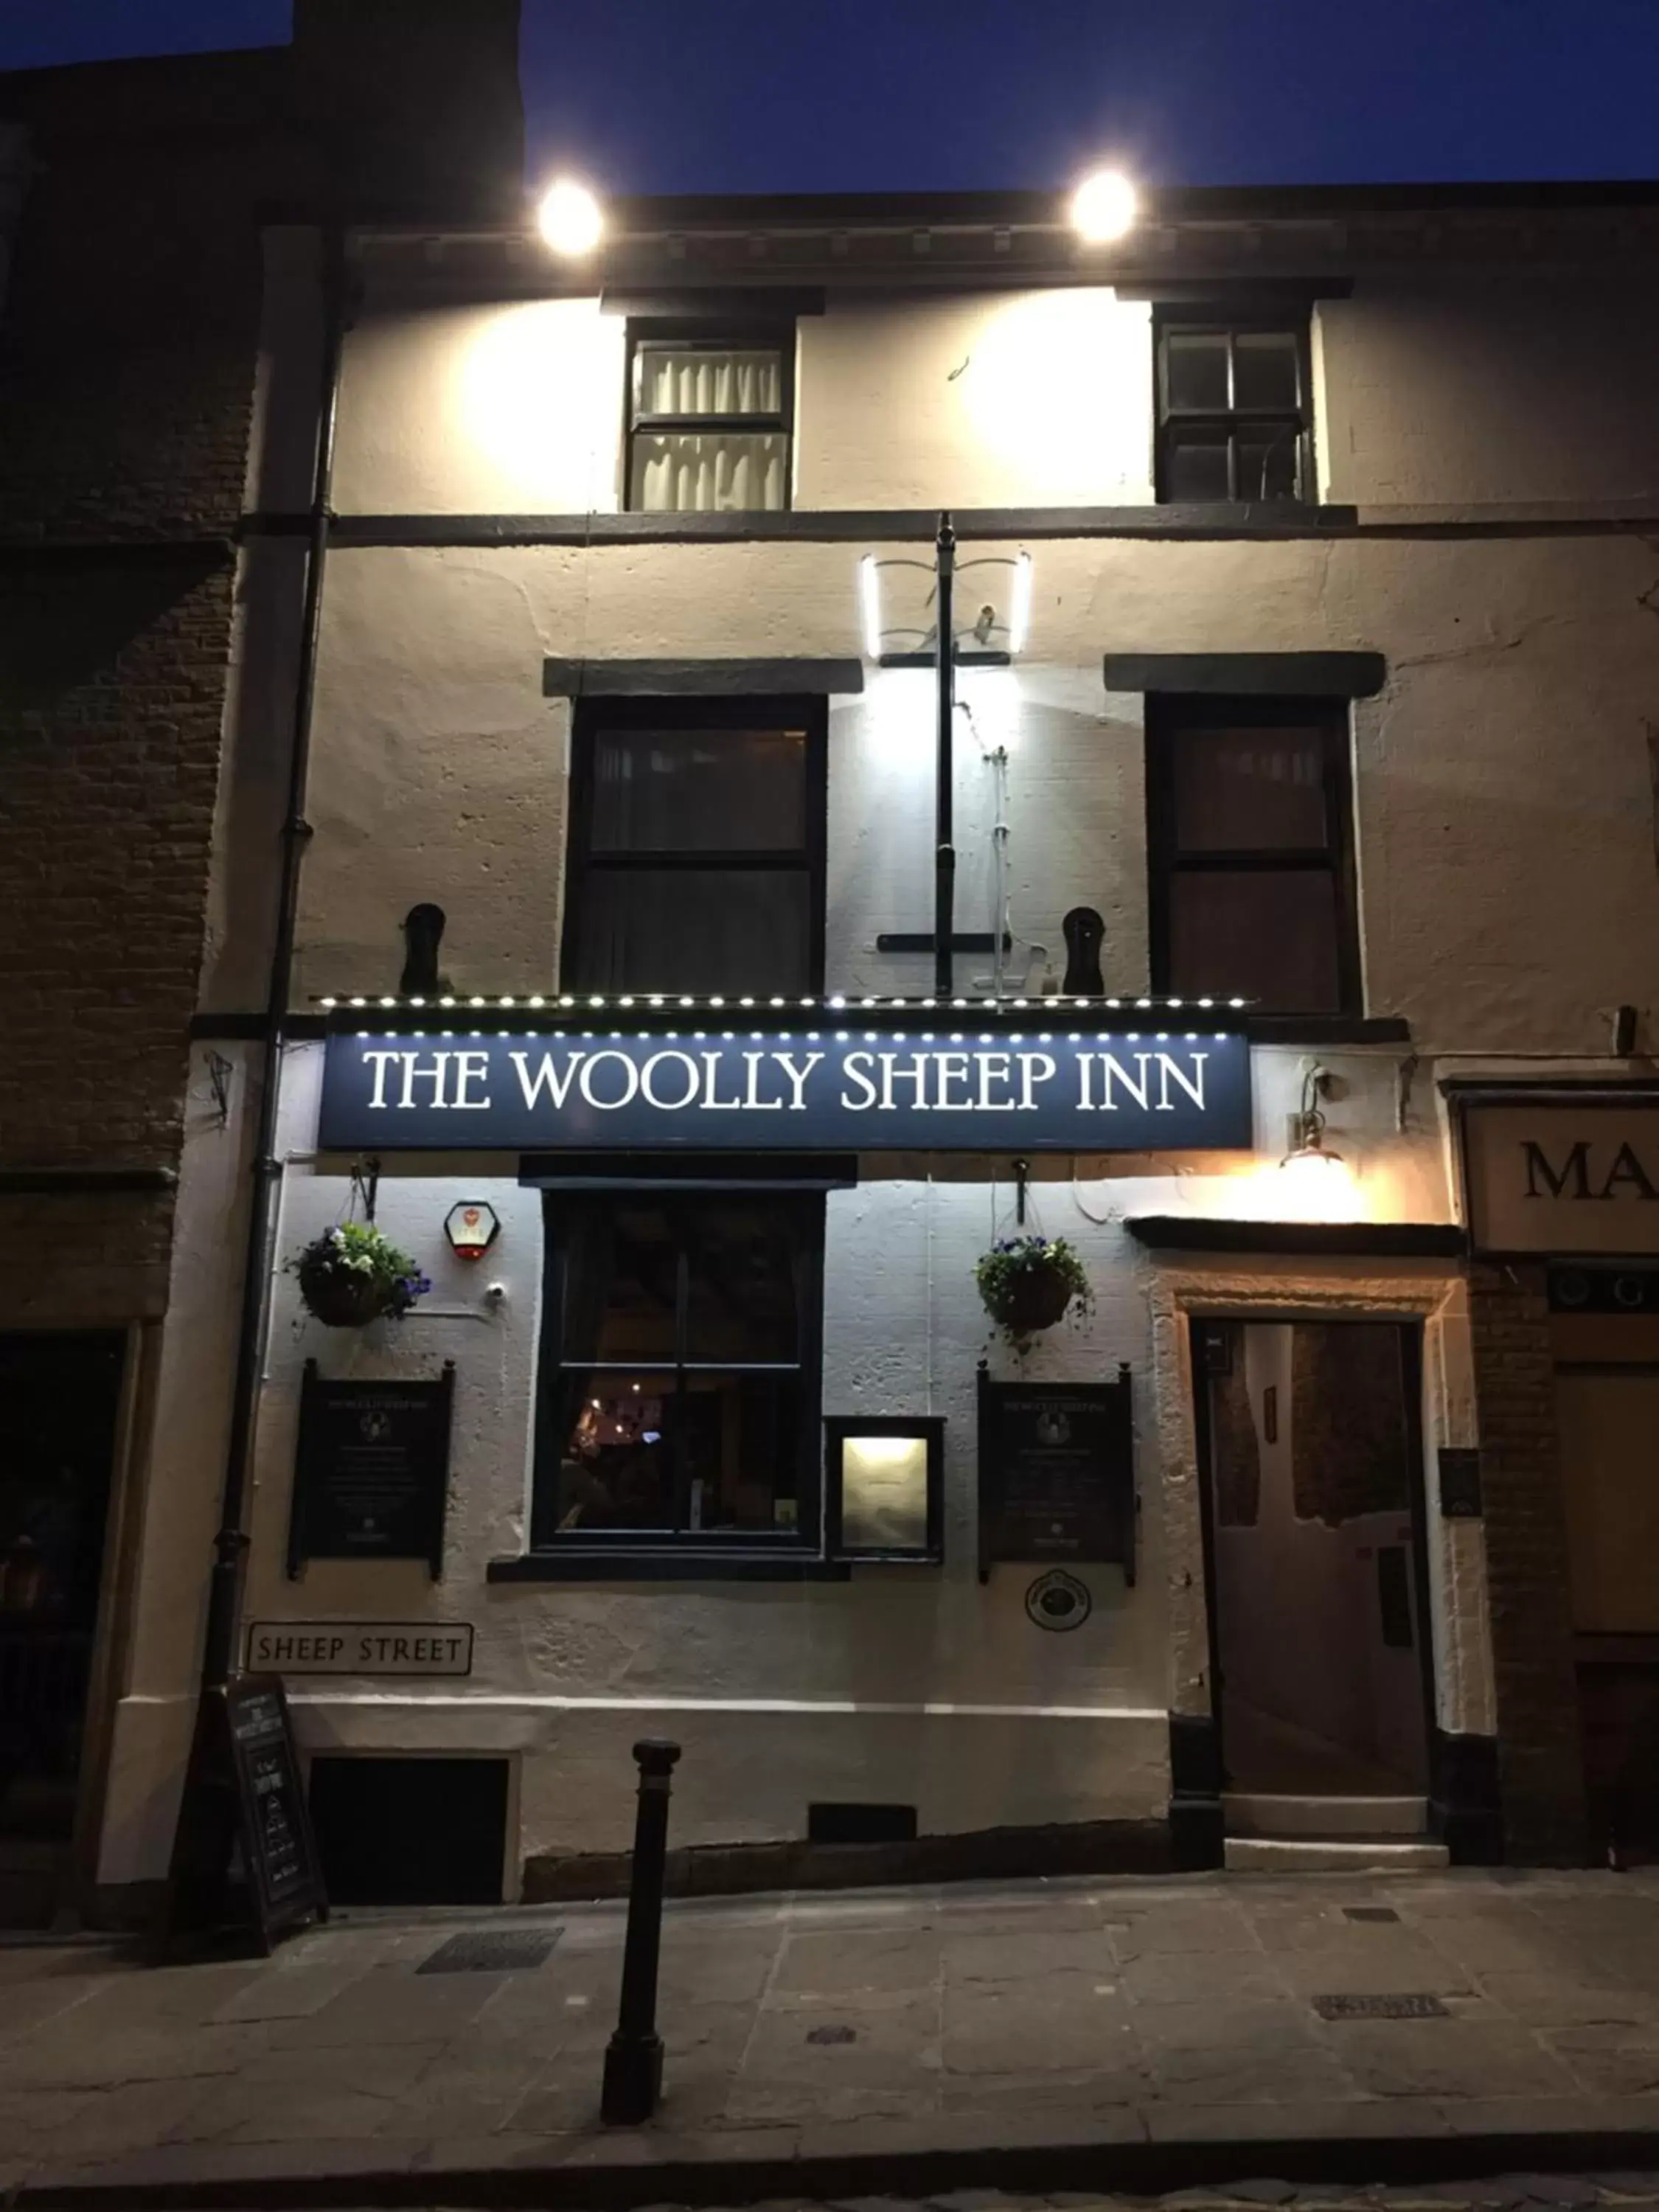 Street view, Property Building in The Woolly Sheep Inn